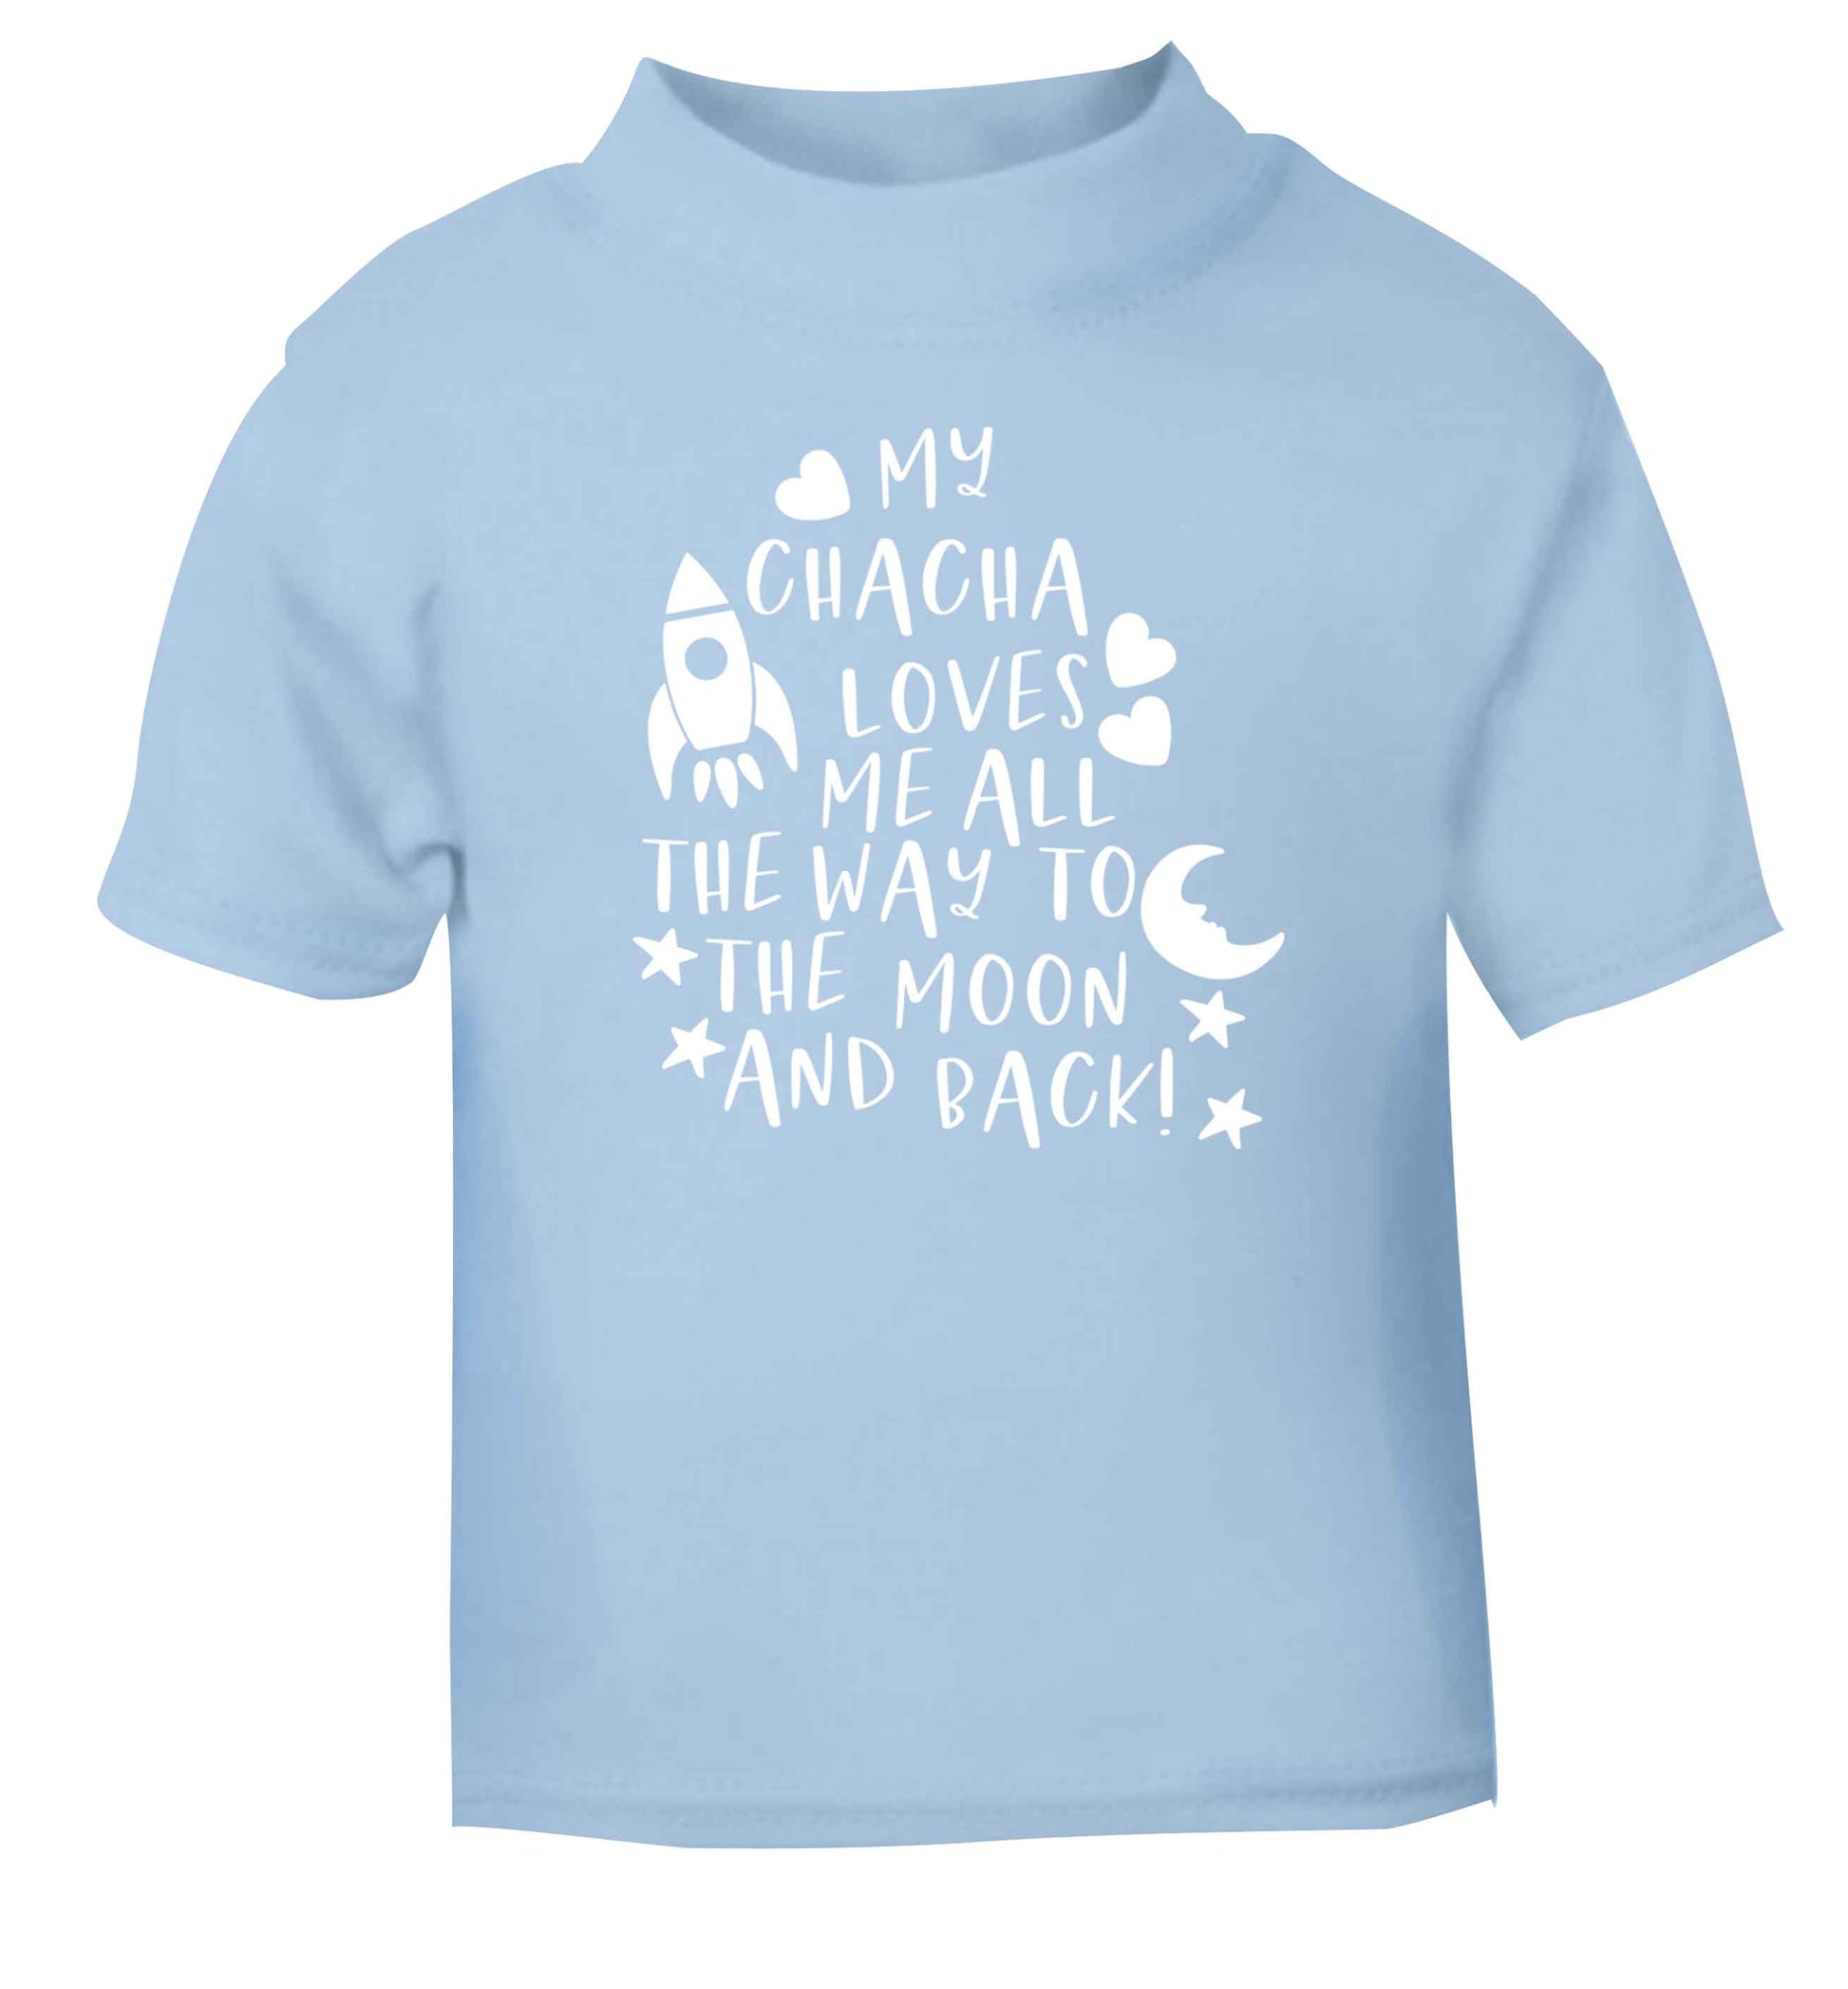 My chacha loves me all the way to the moon and back light blue Baby Toddler Tshirt 2 Years